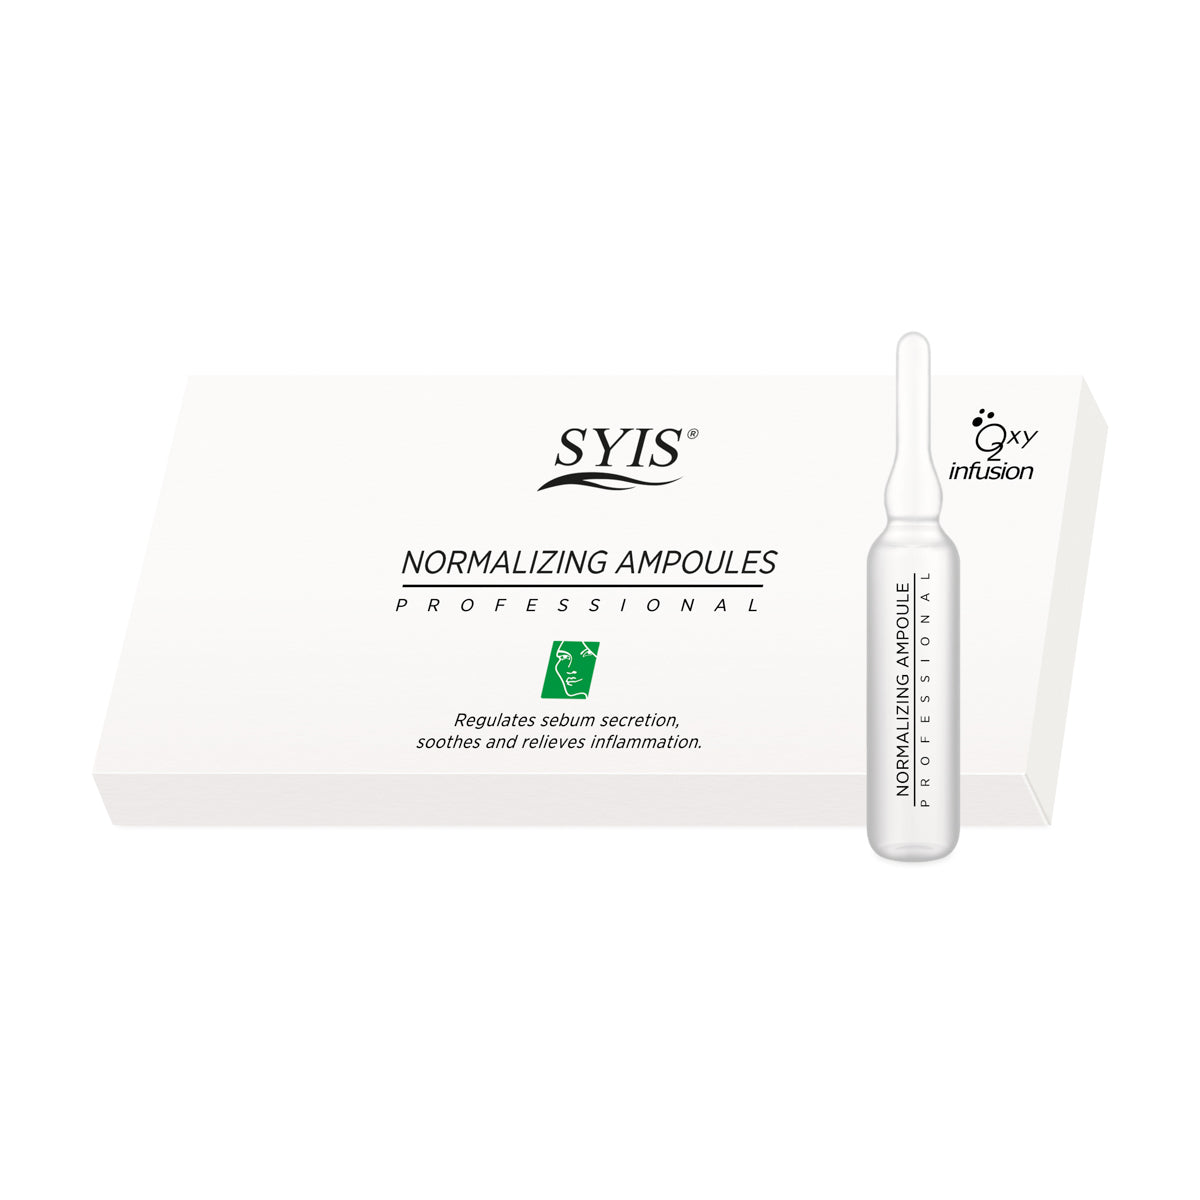 Syis normalizing ampoules 10x3ml